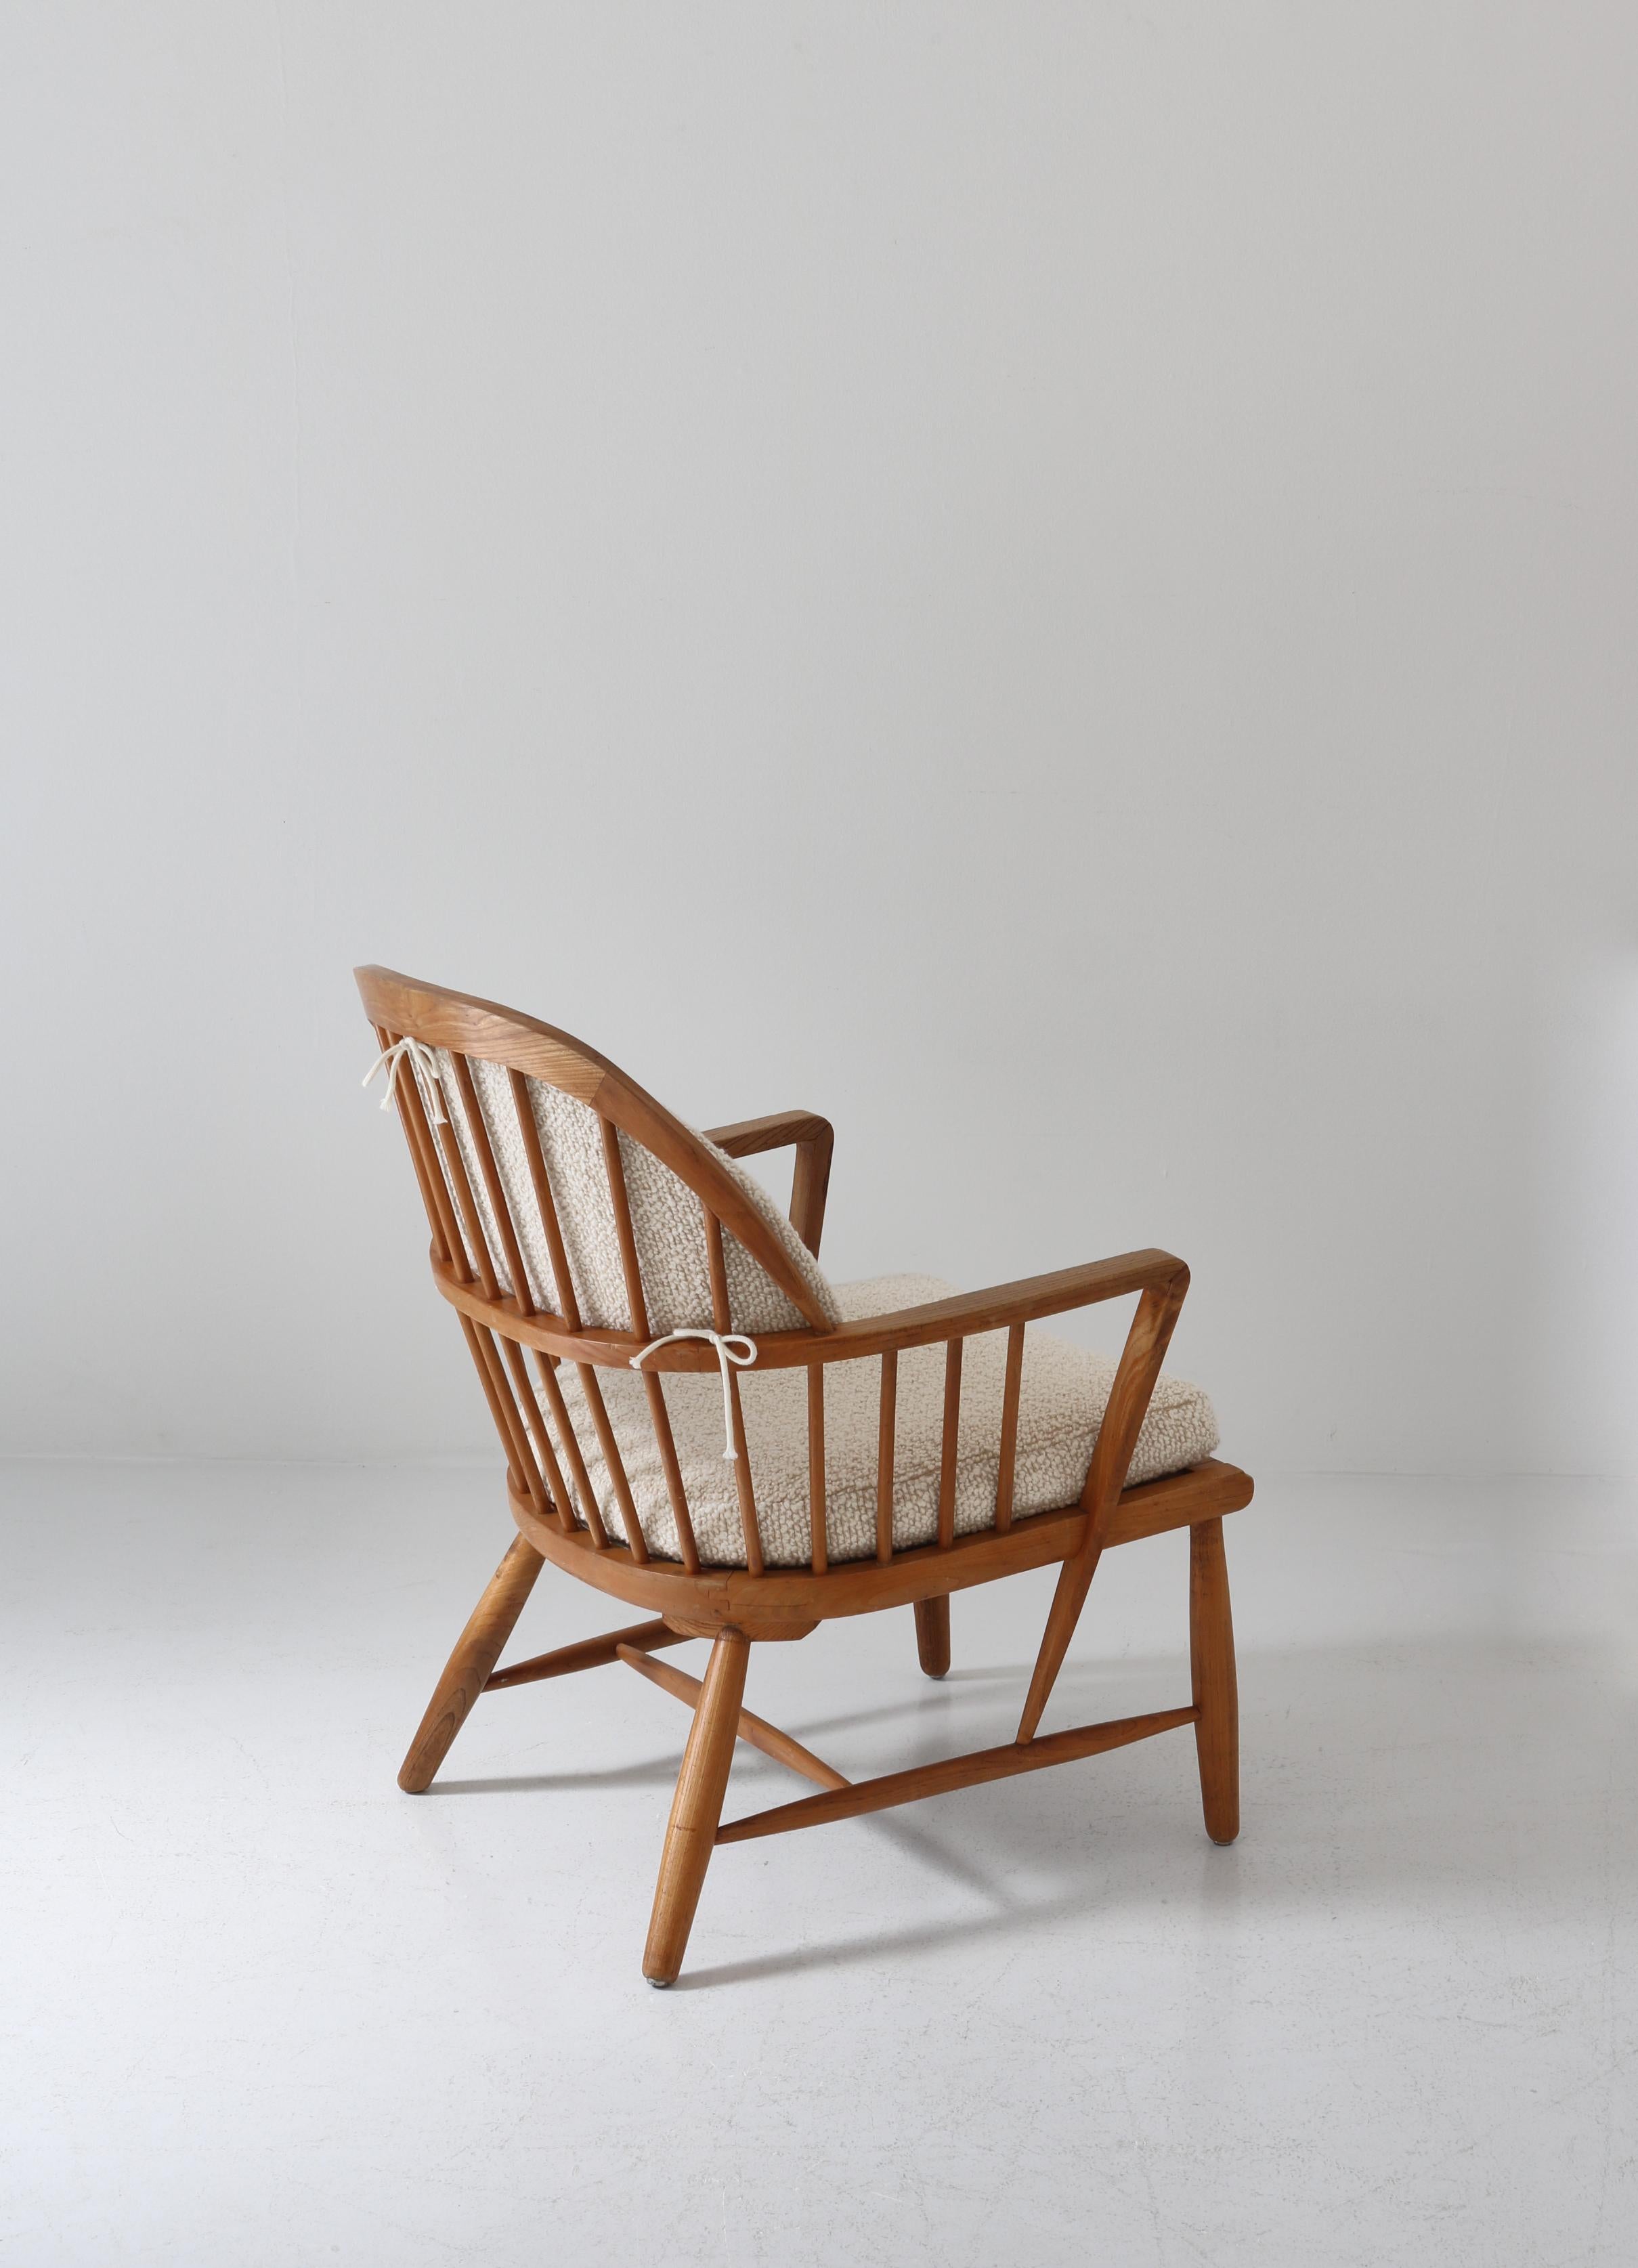 Scandinavian Modern Windsor Chair in Patinated Ash and White Bouclé, 1940s For Sale 3